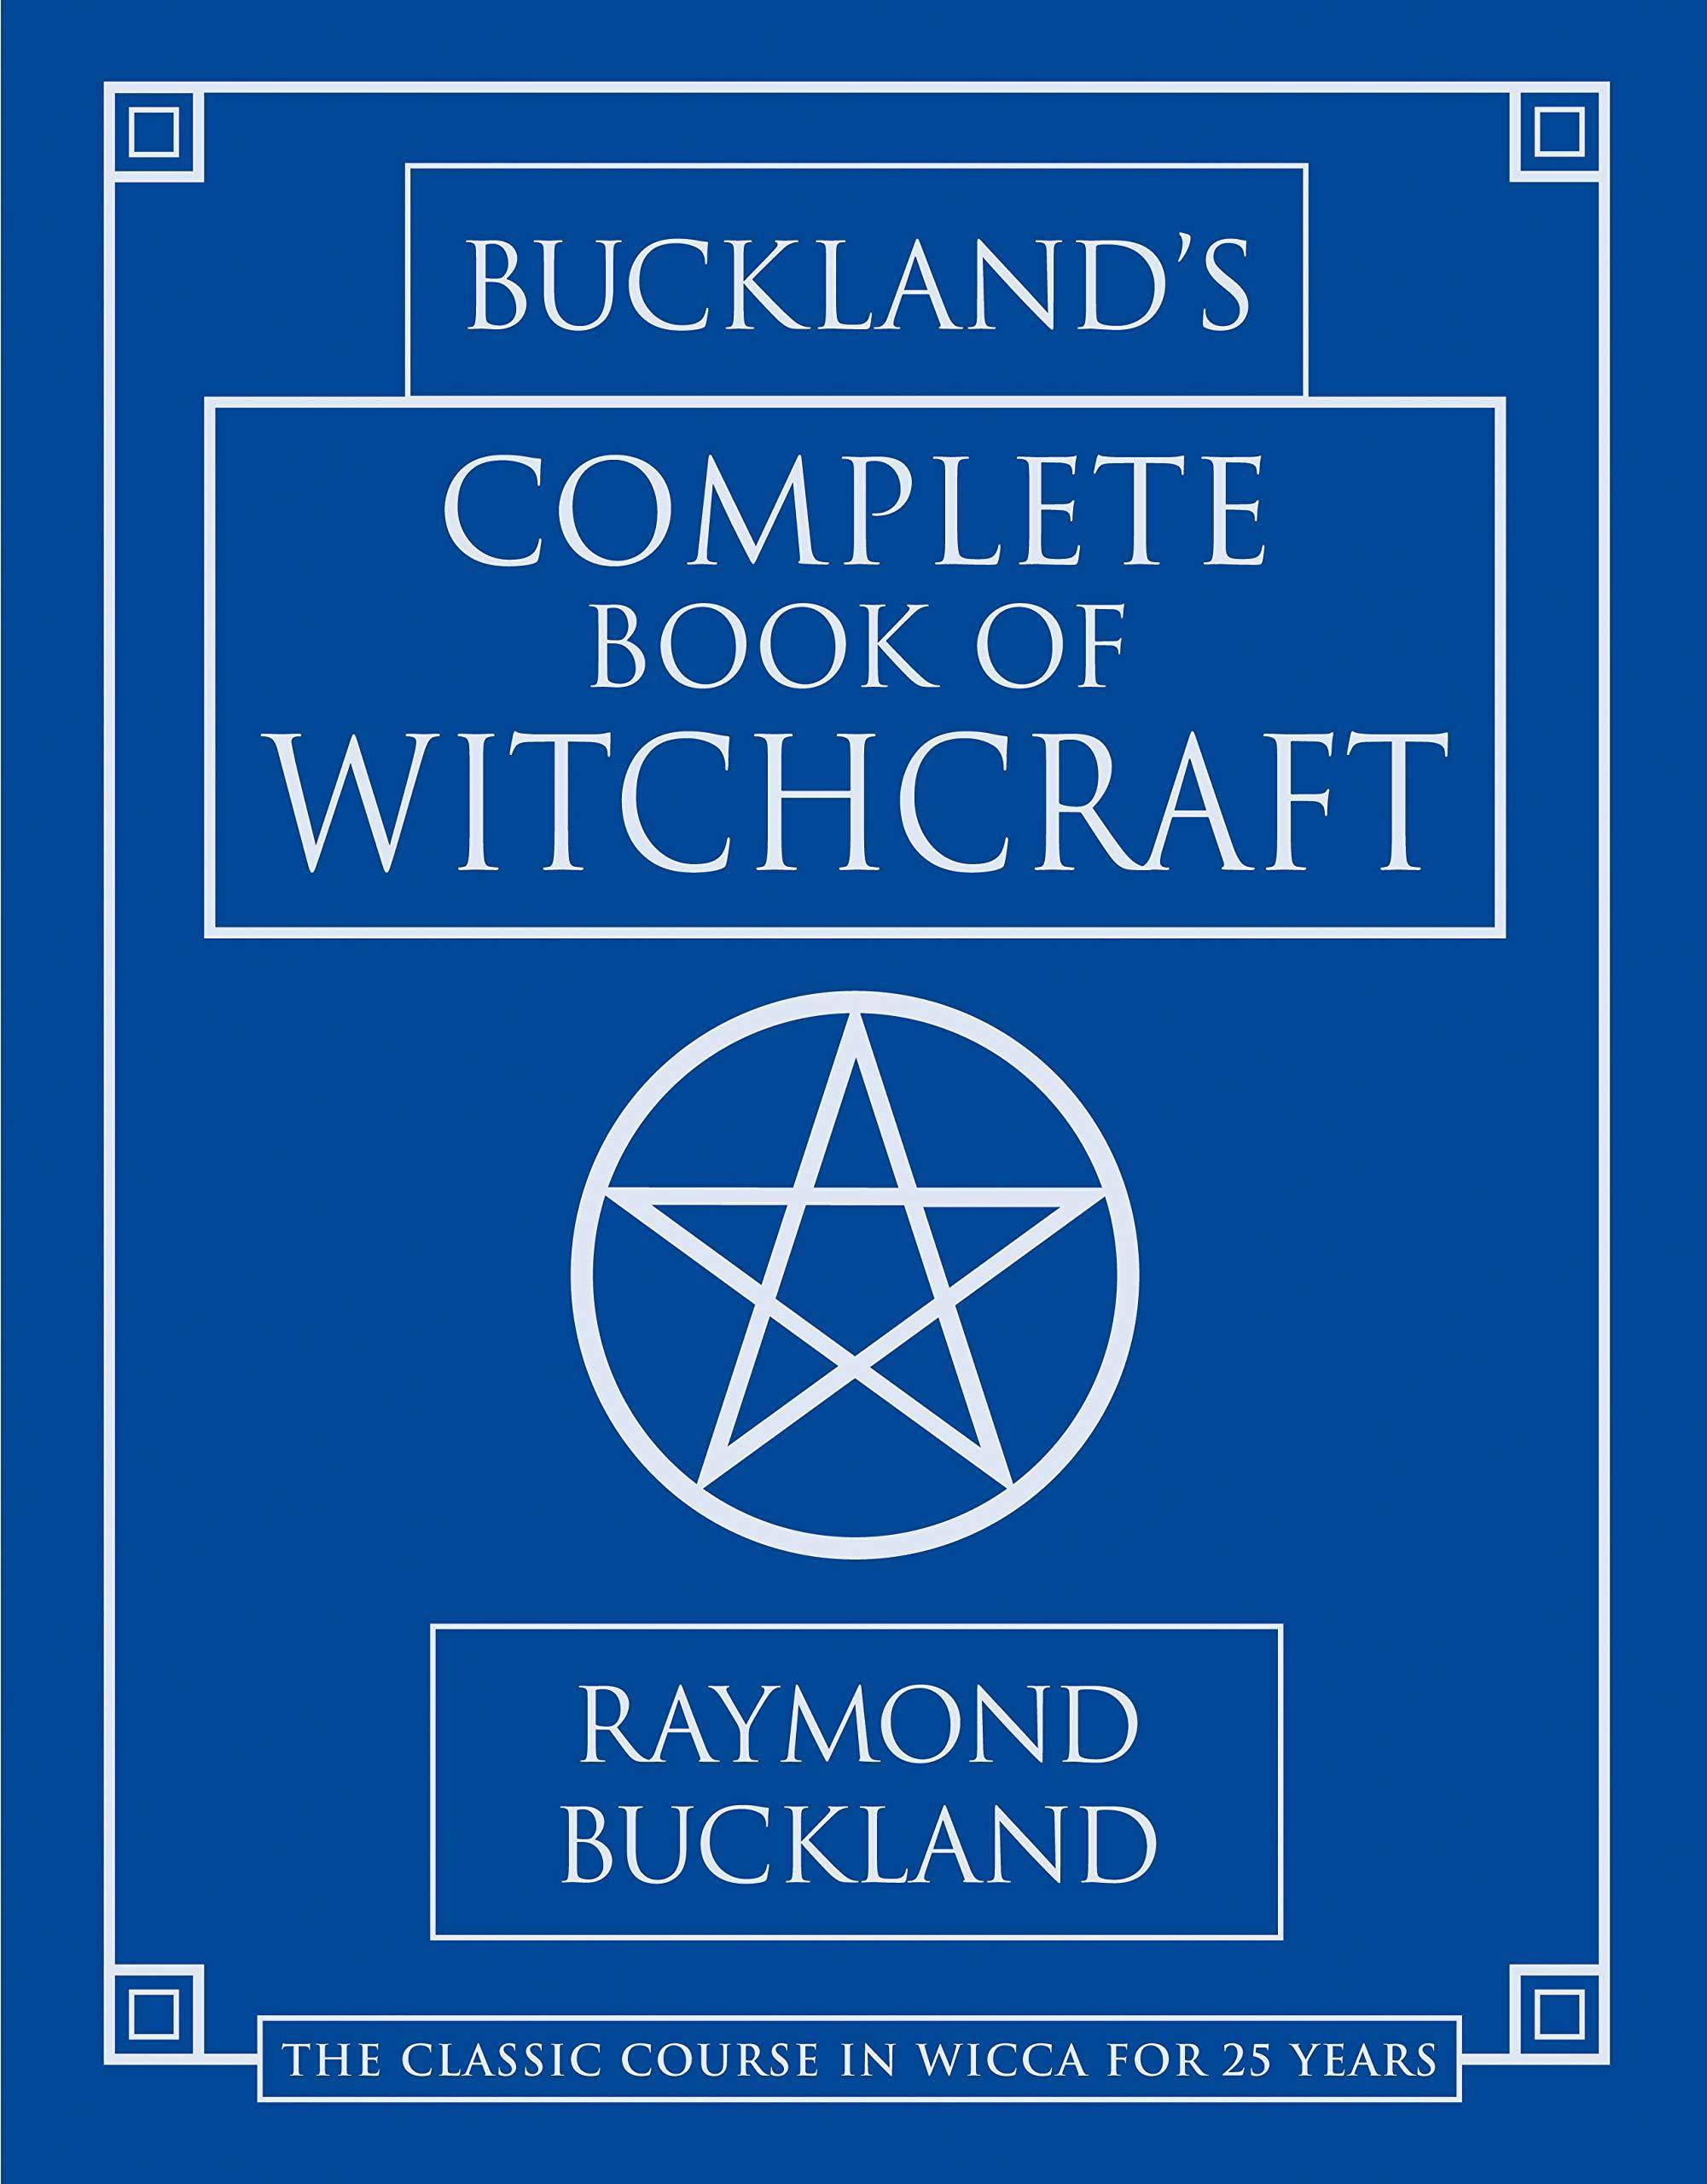 Buckland's Complete Book of Witchcraft - SureShot Books Publishing LLC